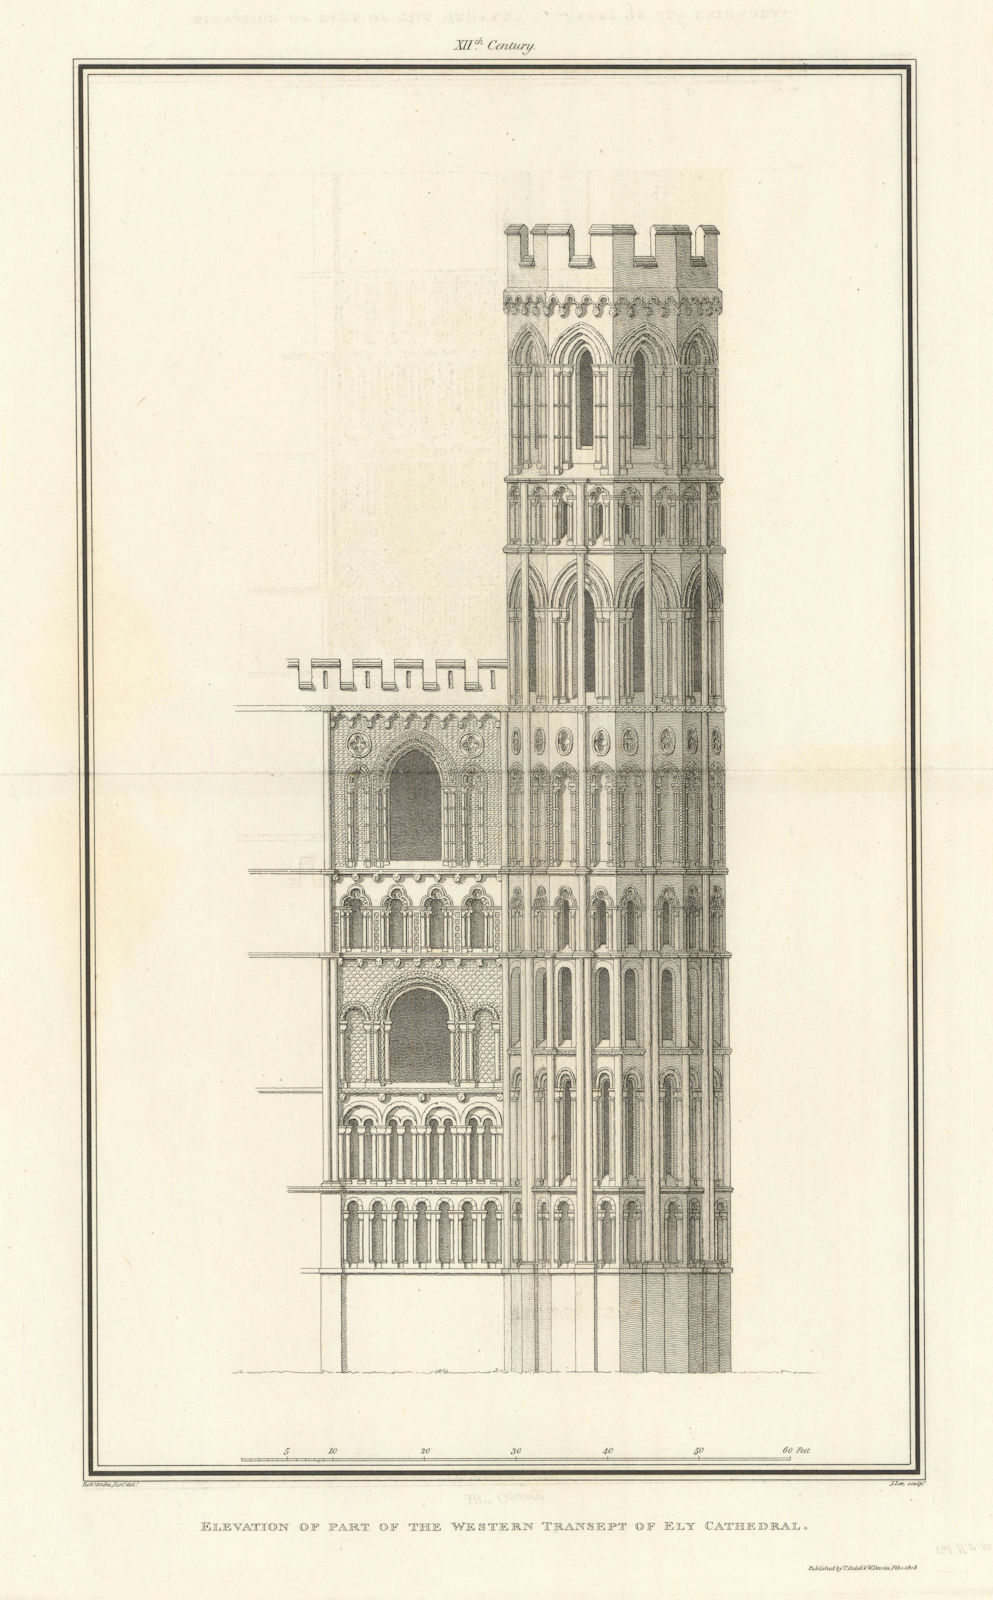 Associate Product Elevation of part of the Western Transept of Ely Cathedral. SMIRKE 1810 print